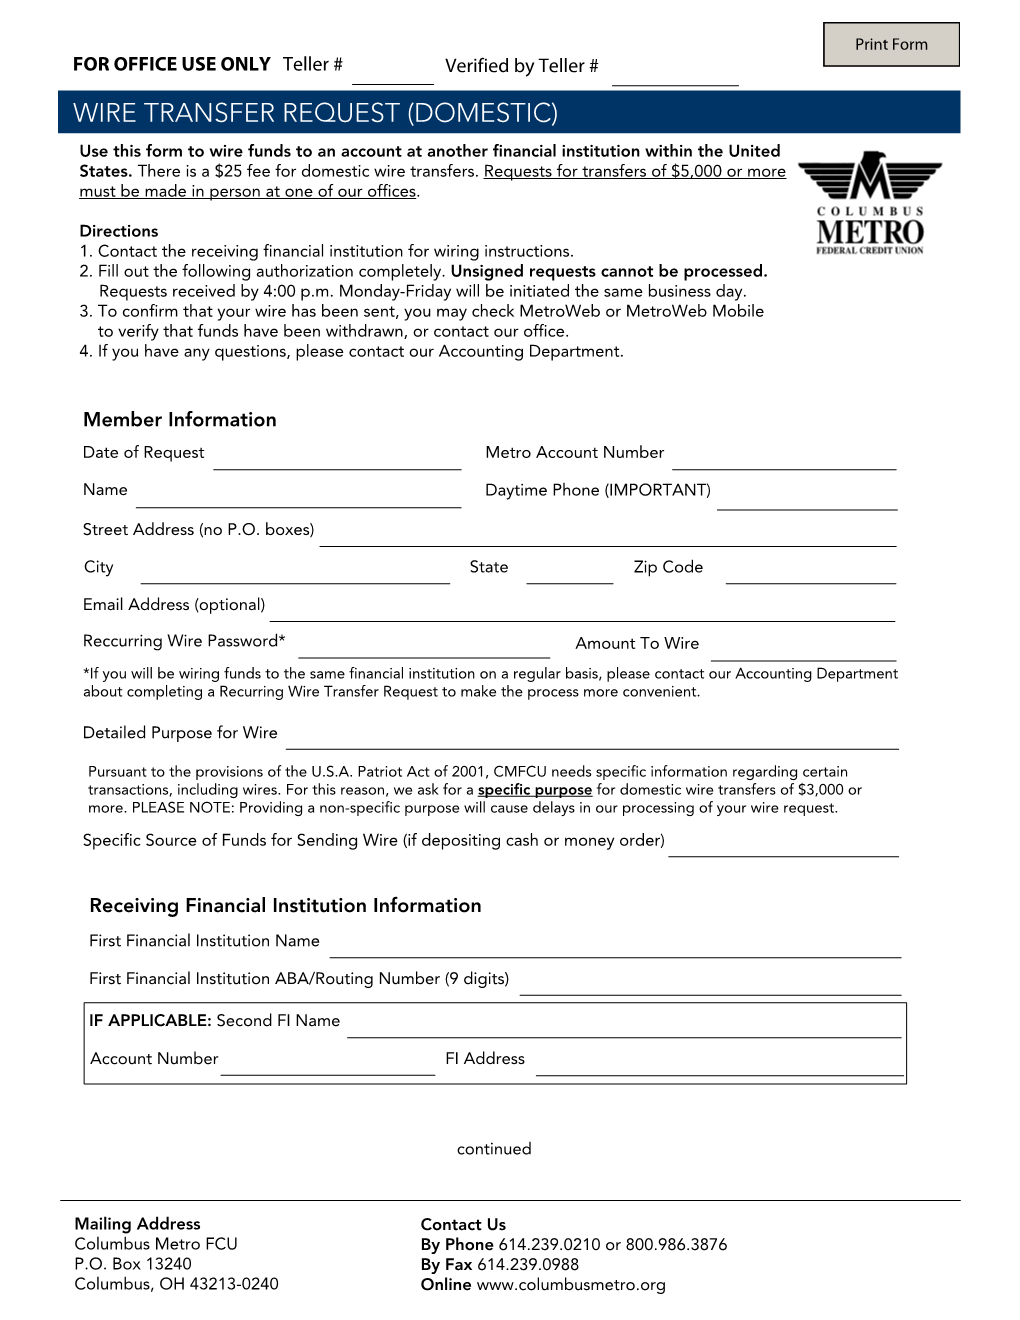 WIRE TRANSFER REQUEST (DOMESTIC) Use This Form to Wire Funds to an Account at Another Financial Institution Within the United States